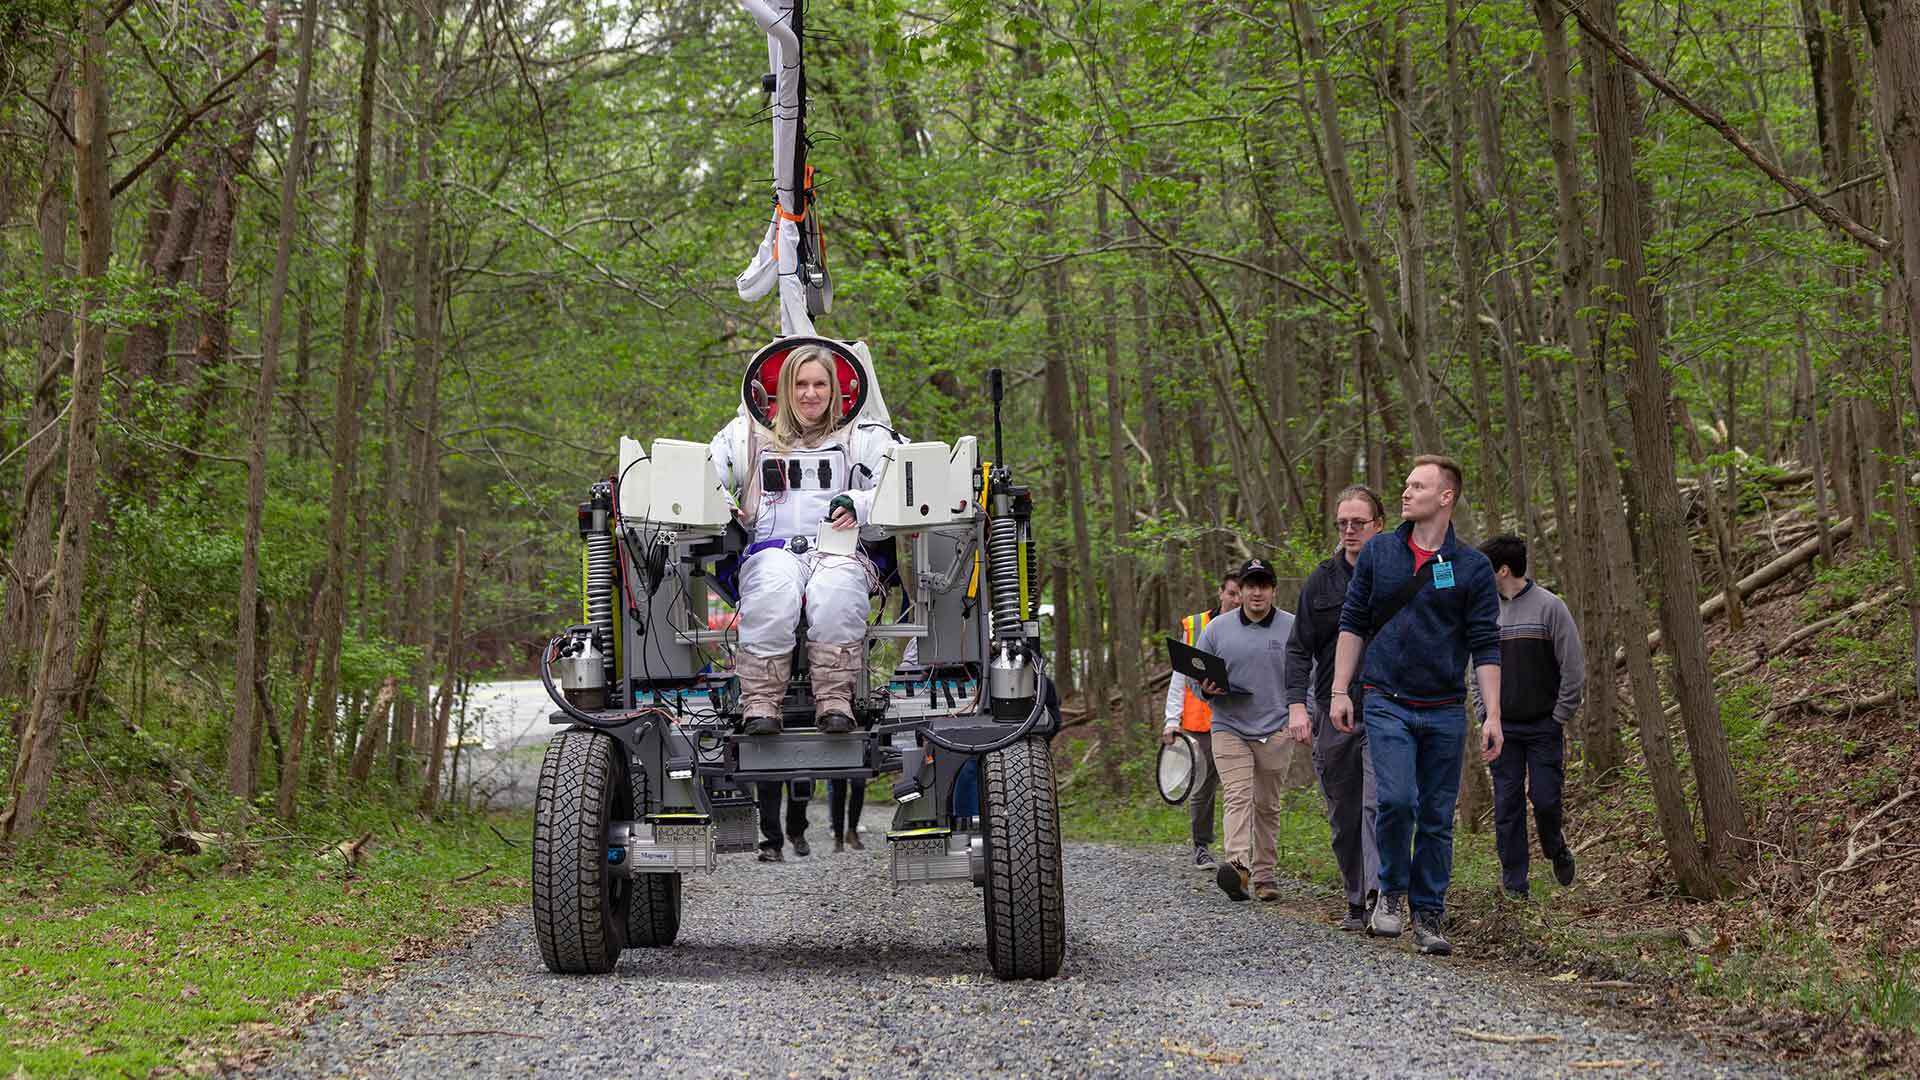 Maggie Haslam wears space suit while riding lunar rover